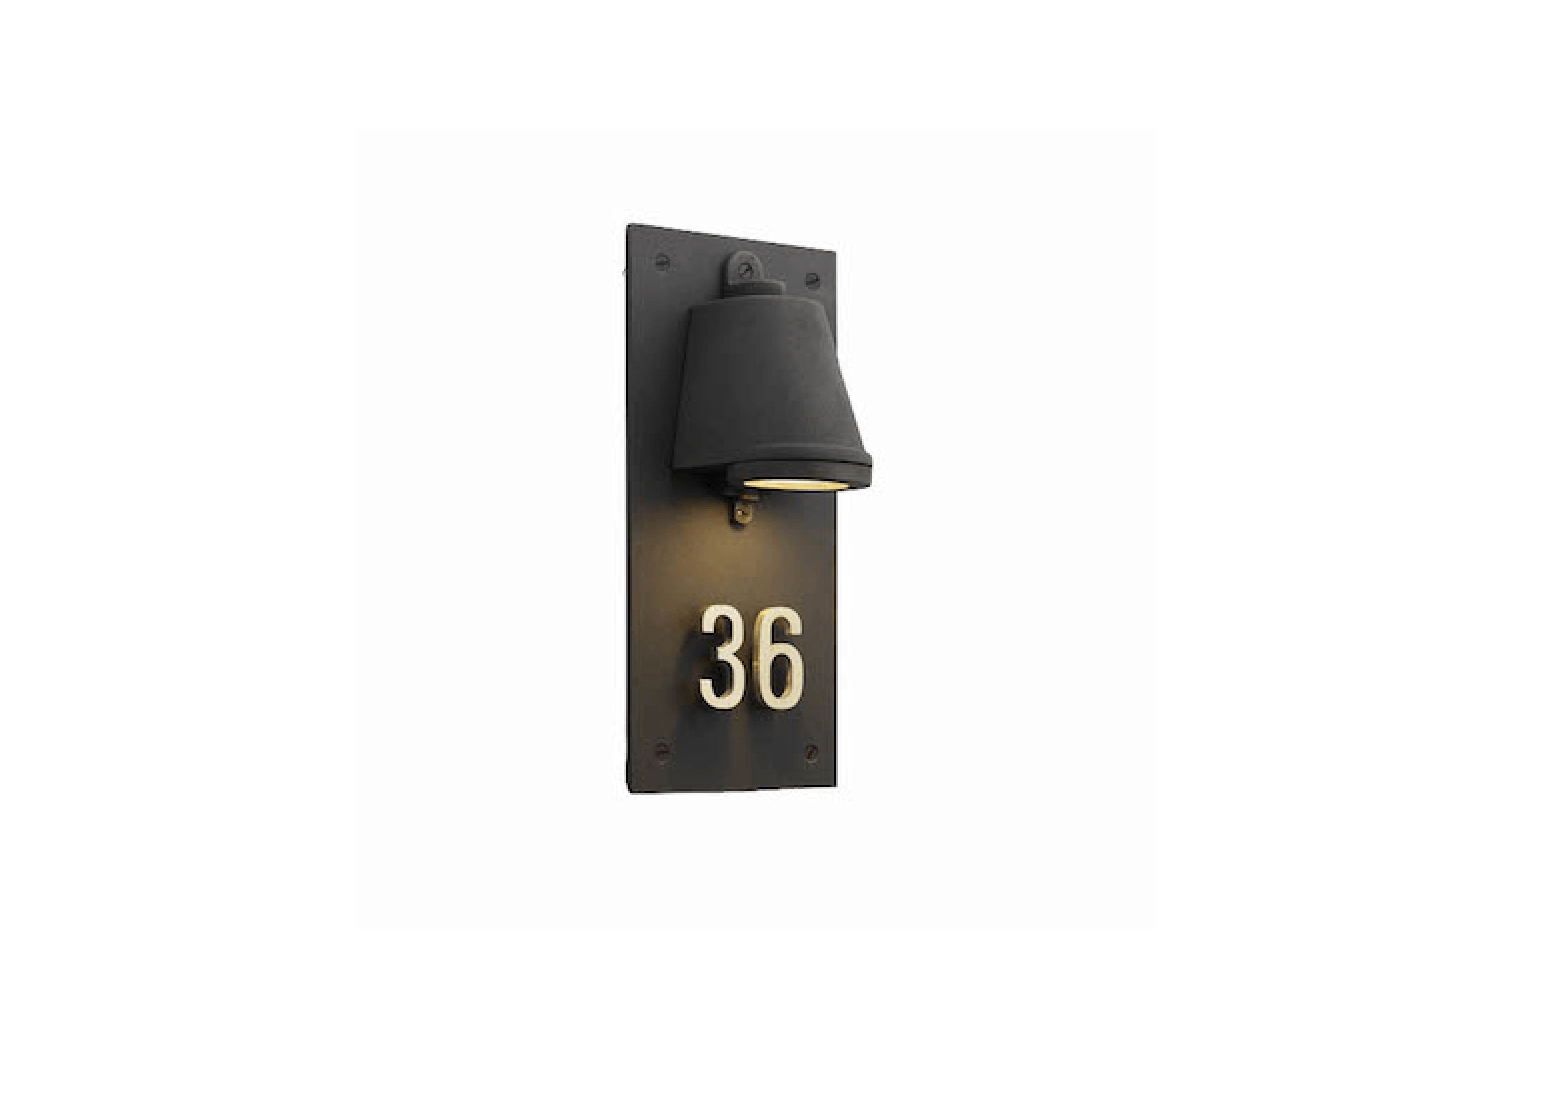 LED House Number Light Waterproof Wall Mounted Illuminated House Numbers Plaque Solar Powered Digital Night Light Door Number Sign for Outdoor Bar Decoration